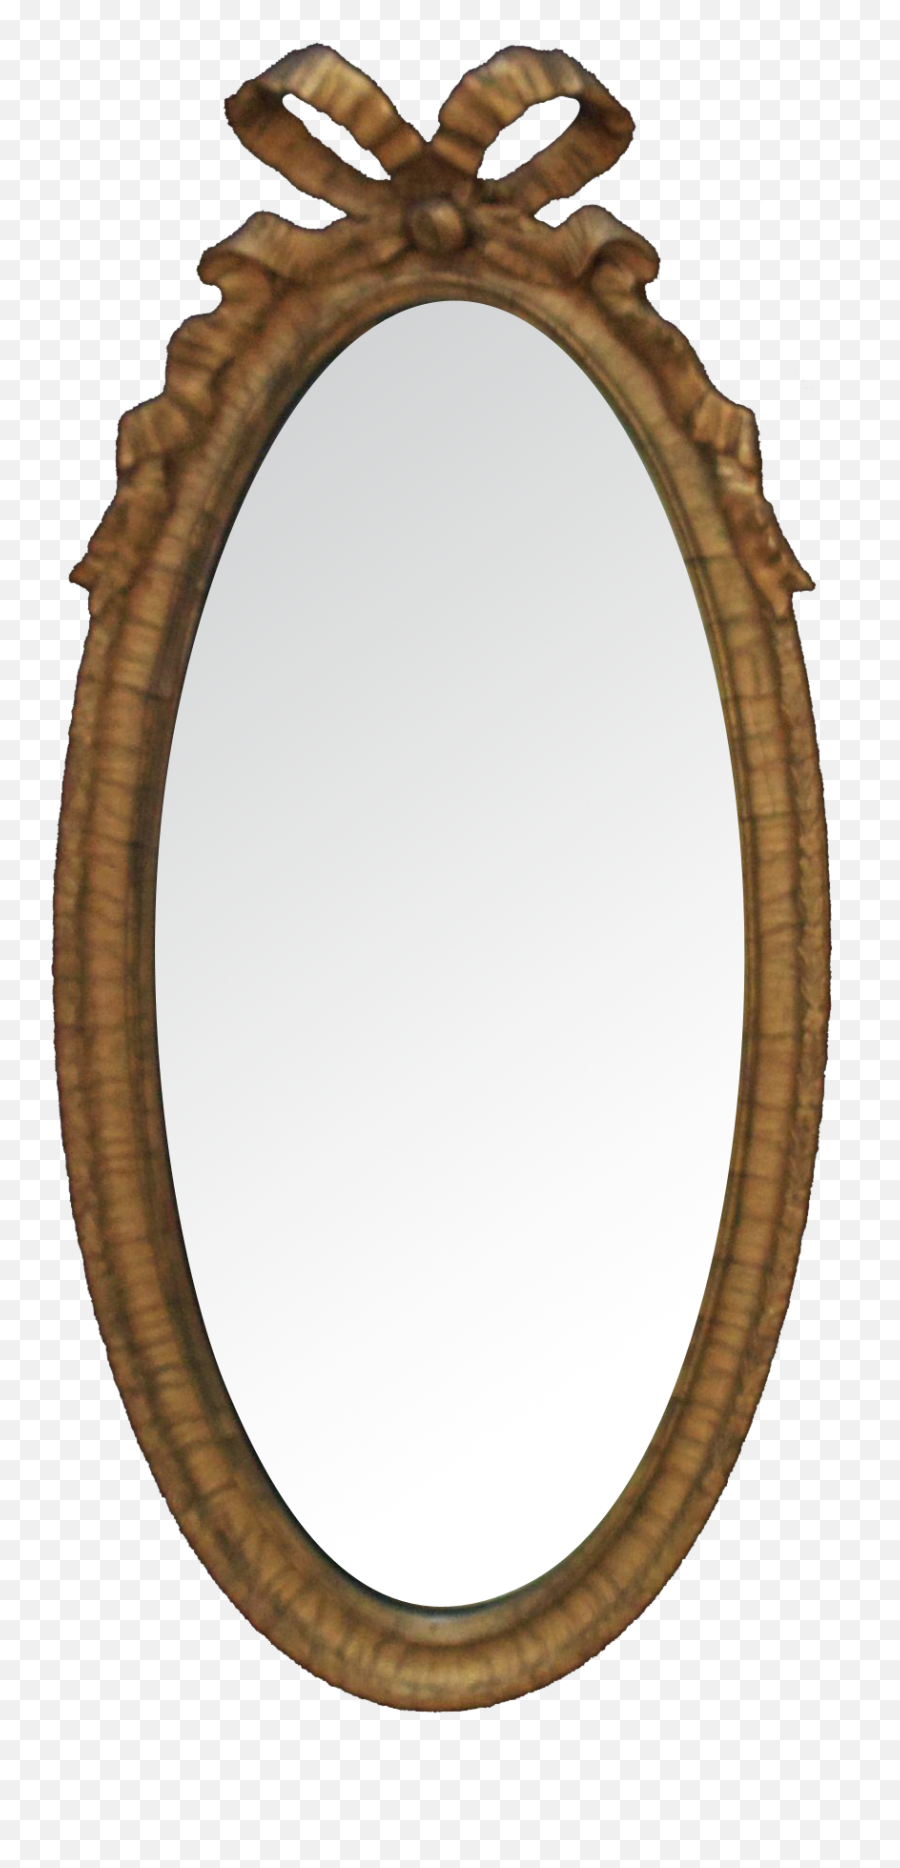 Your Antique Amp Collectable Frames Amp Mirrors Shop Emoji,Victorian Frame Png